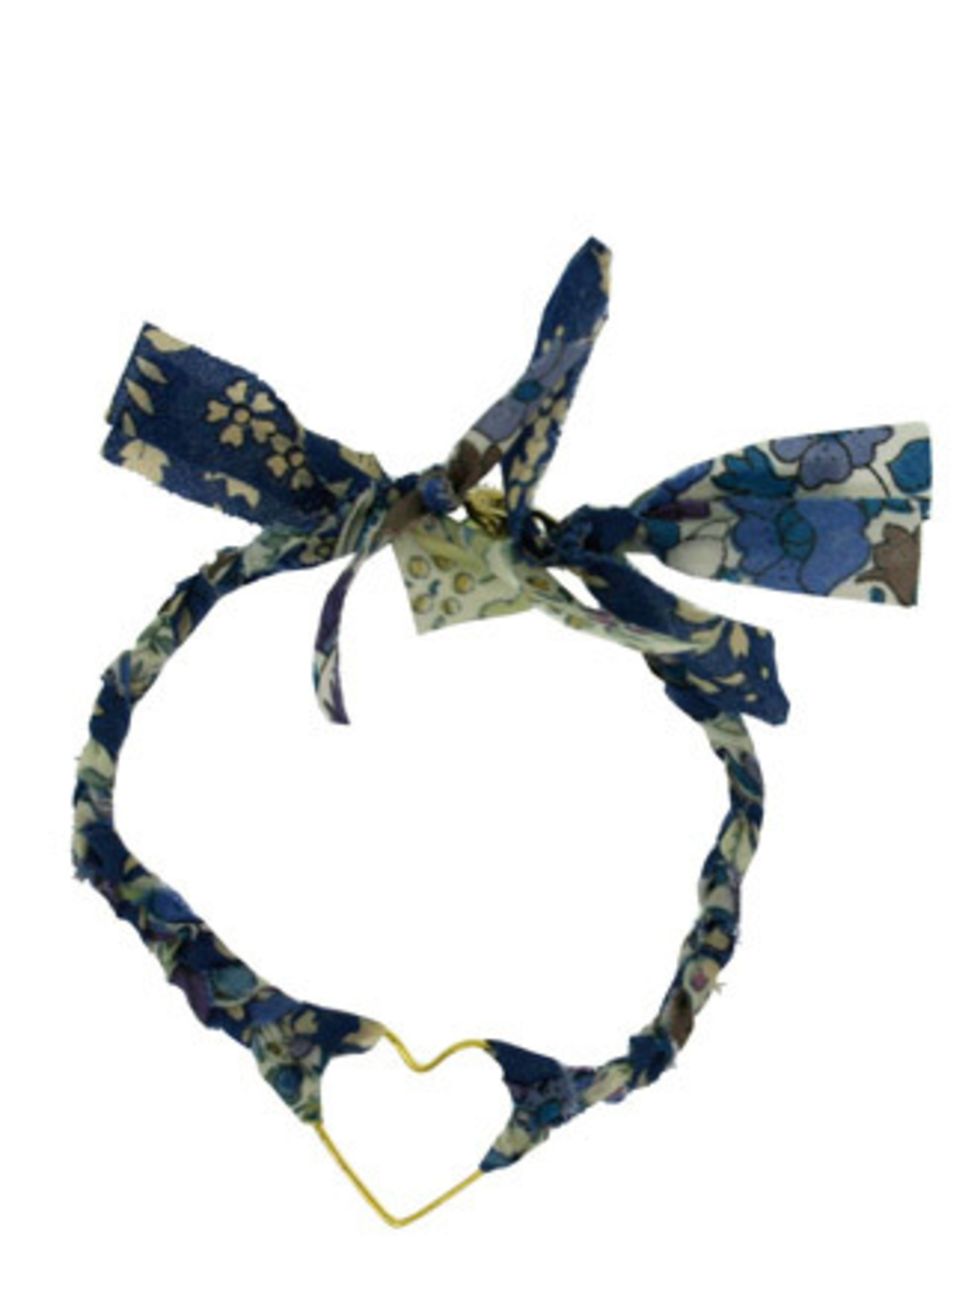 <p>This floral bracelet with heart detail is too pretty to pass up. Buy it now or regret it later.</p><p>Bracelet, £55 by Blue by Marie Joy</p>